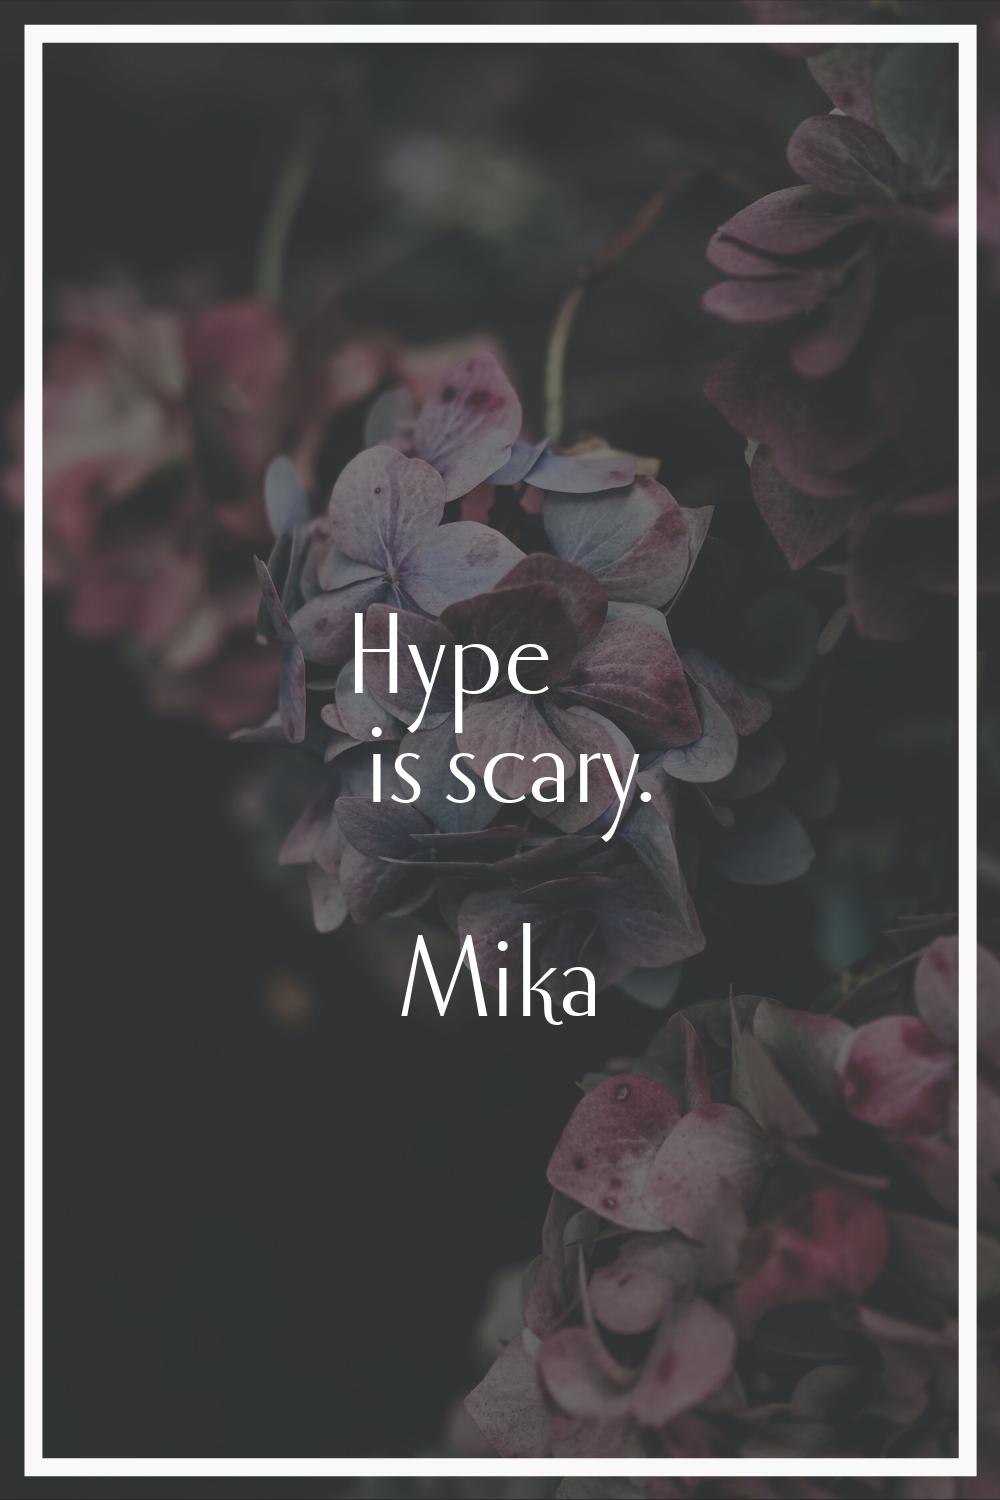 Hype is scary.